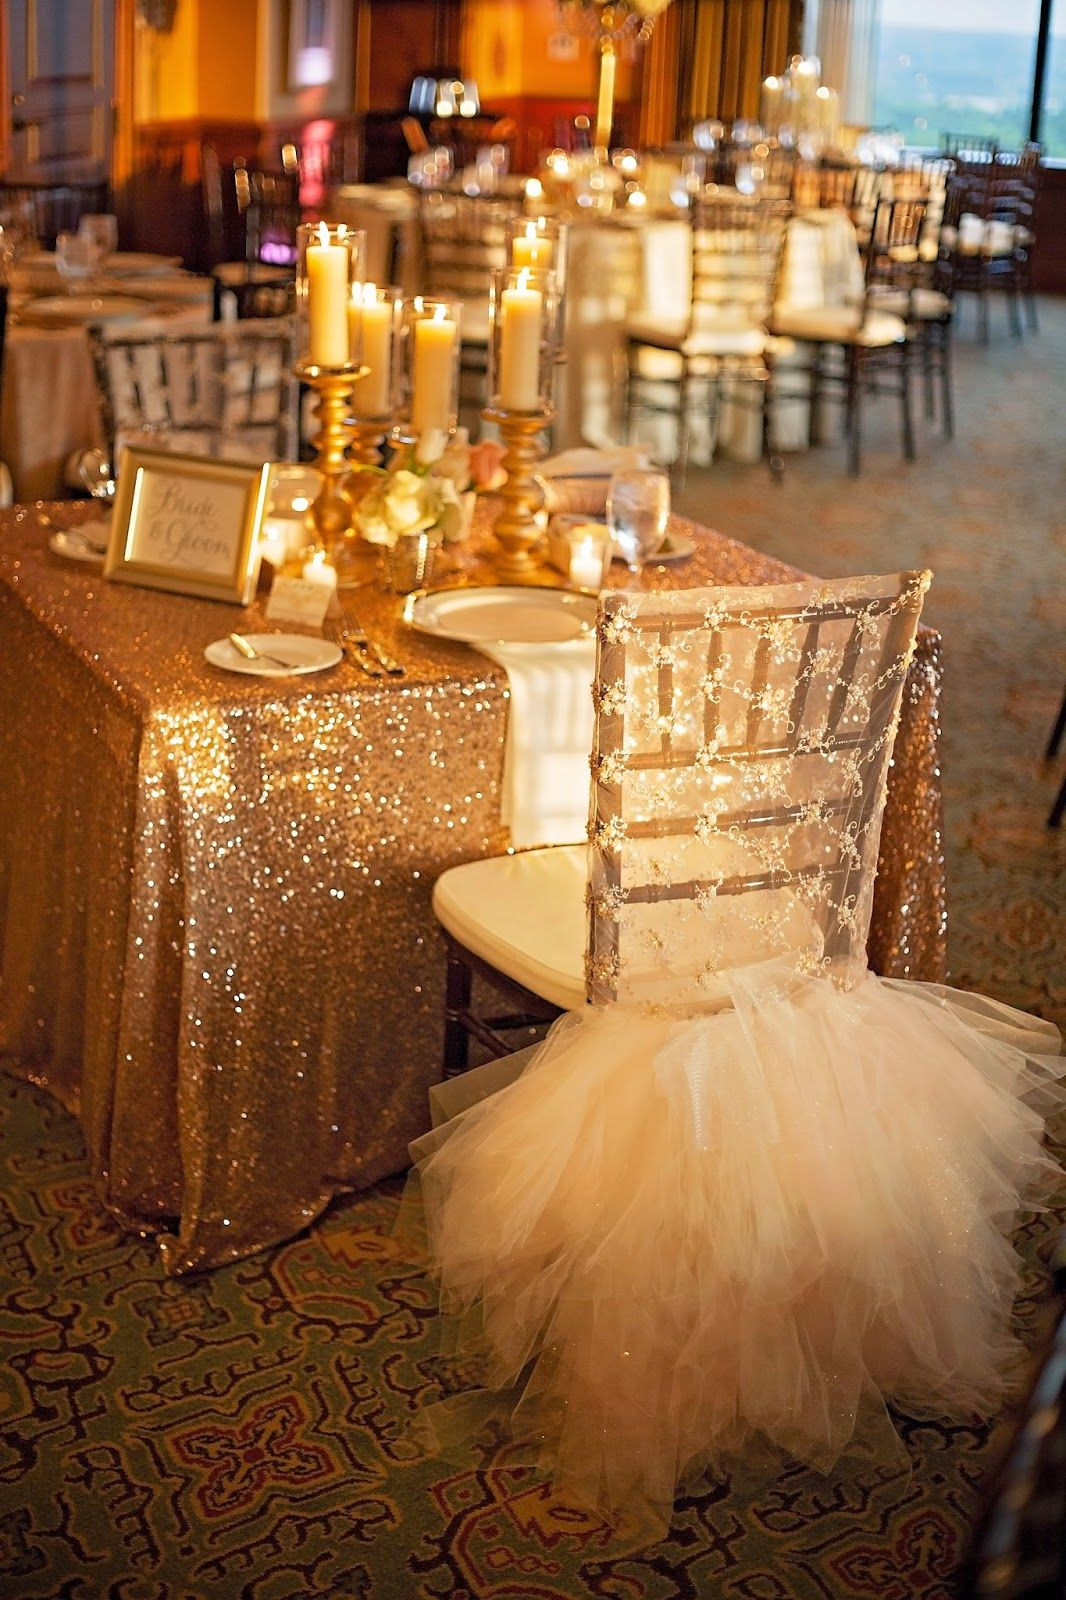 Gold Wedding Decorations Table
 Lace and Tulle chair cover sequin tablecloth sweetheart